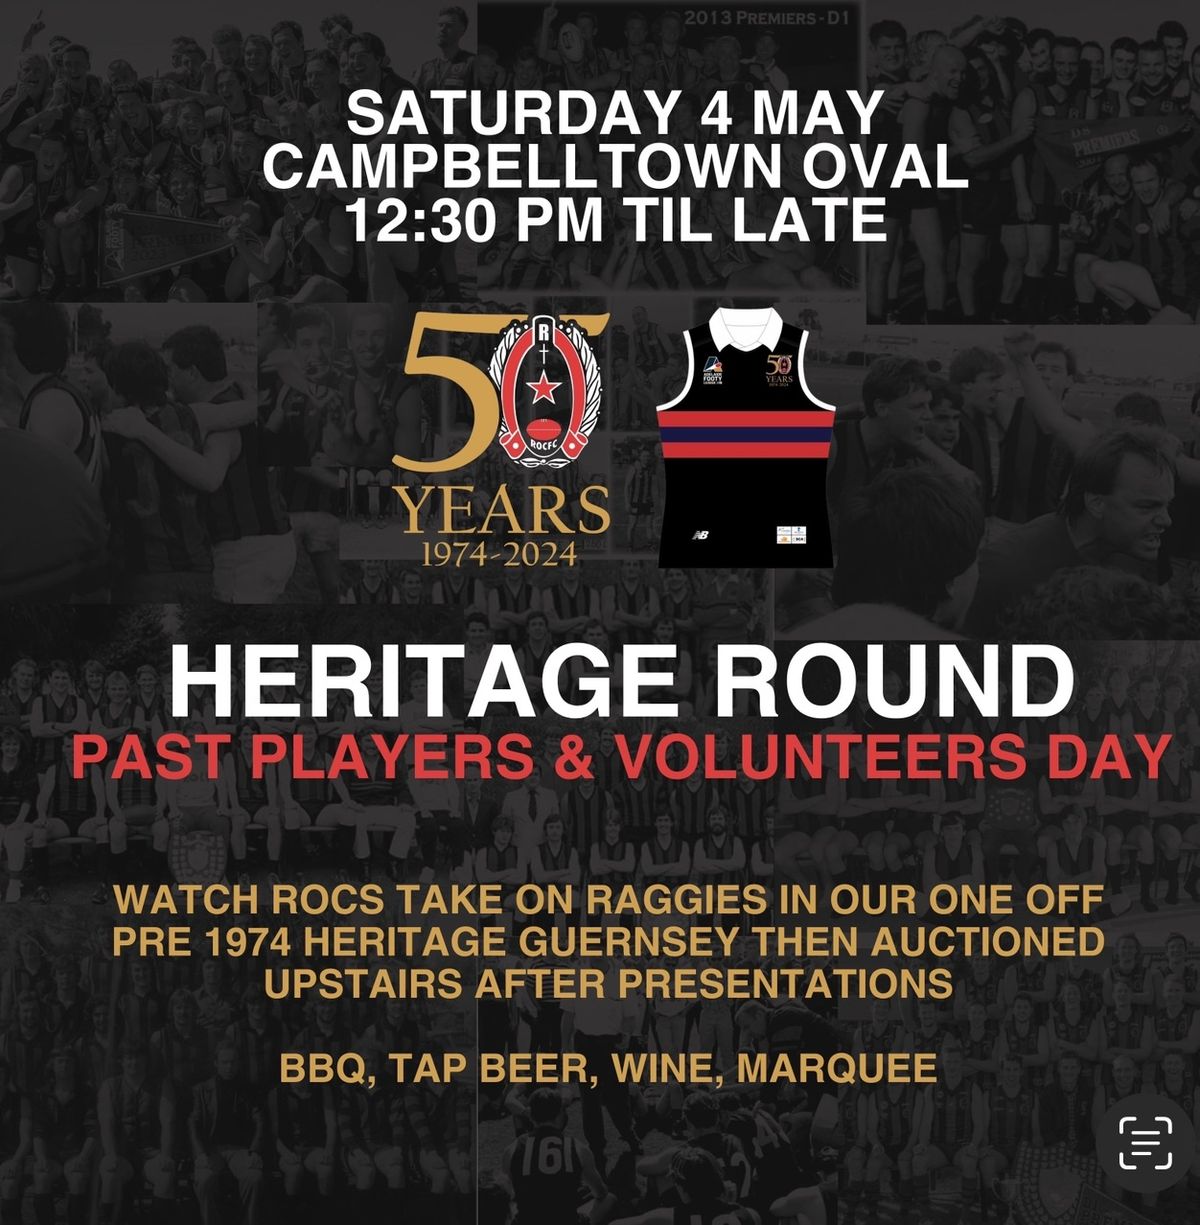 Heritage Round featuring Past Players & Volunteers Day